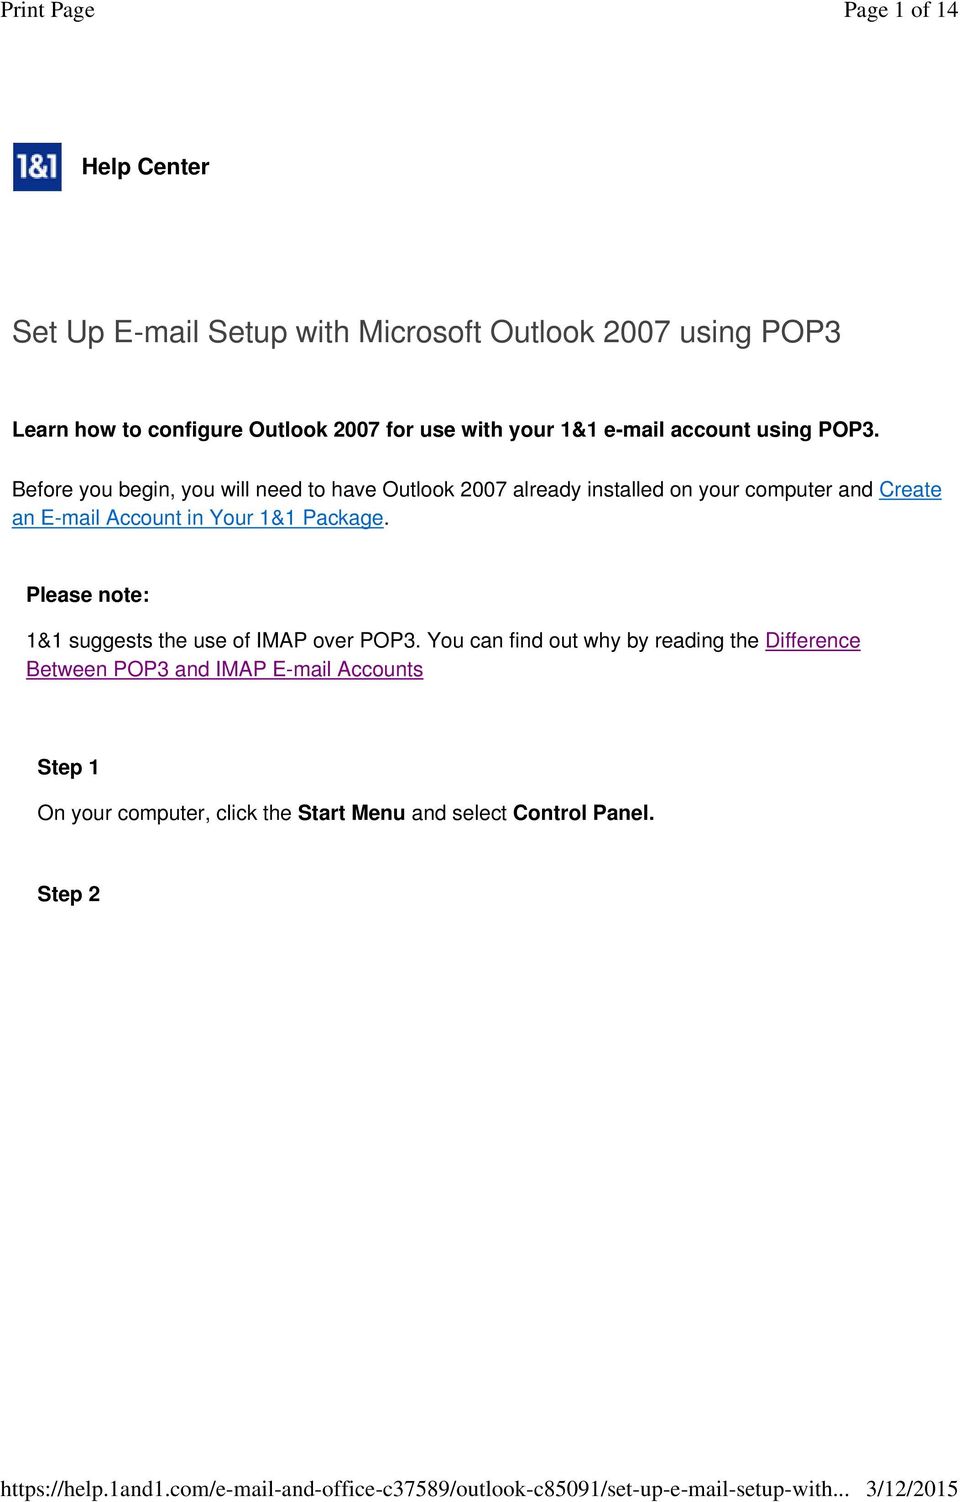 Before you begin, you will need to have Outlook 2007 already installed on your computer and Create an E-mail Account in Your 1&1